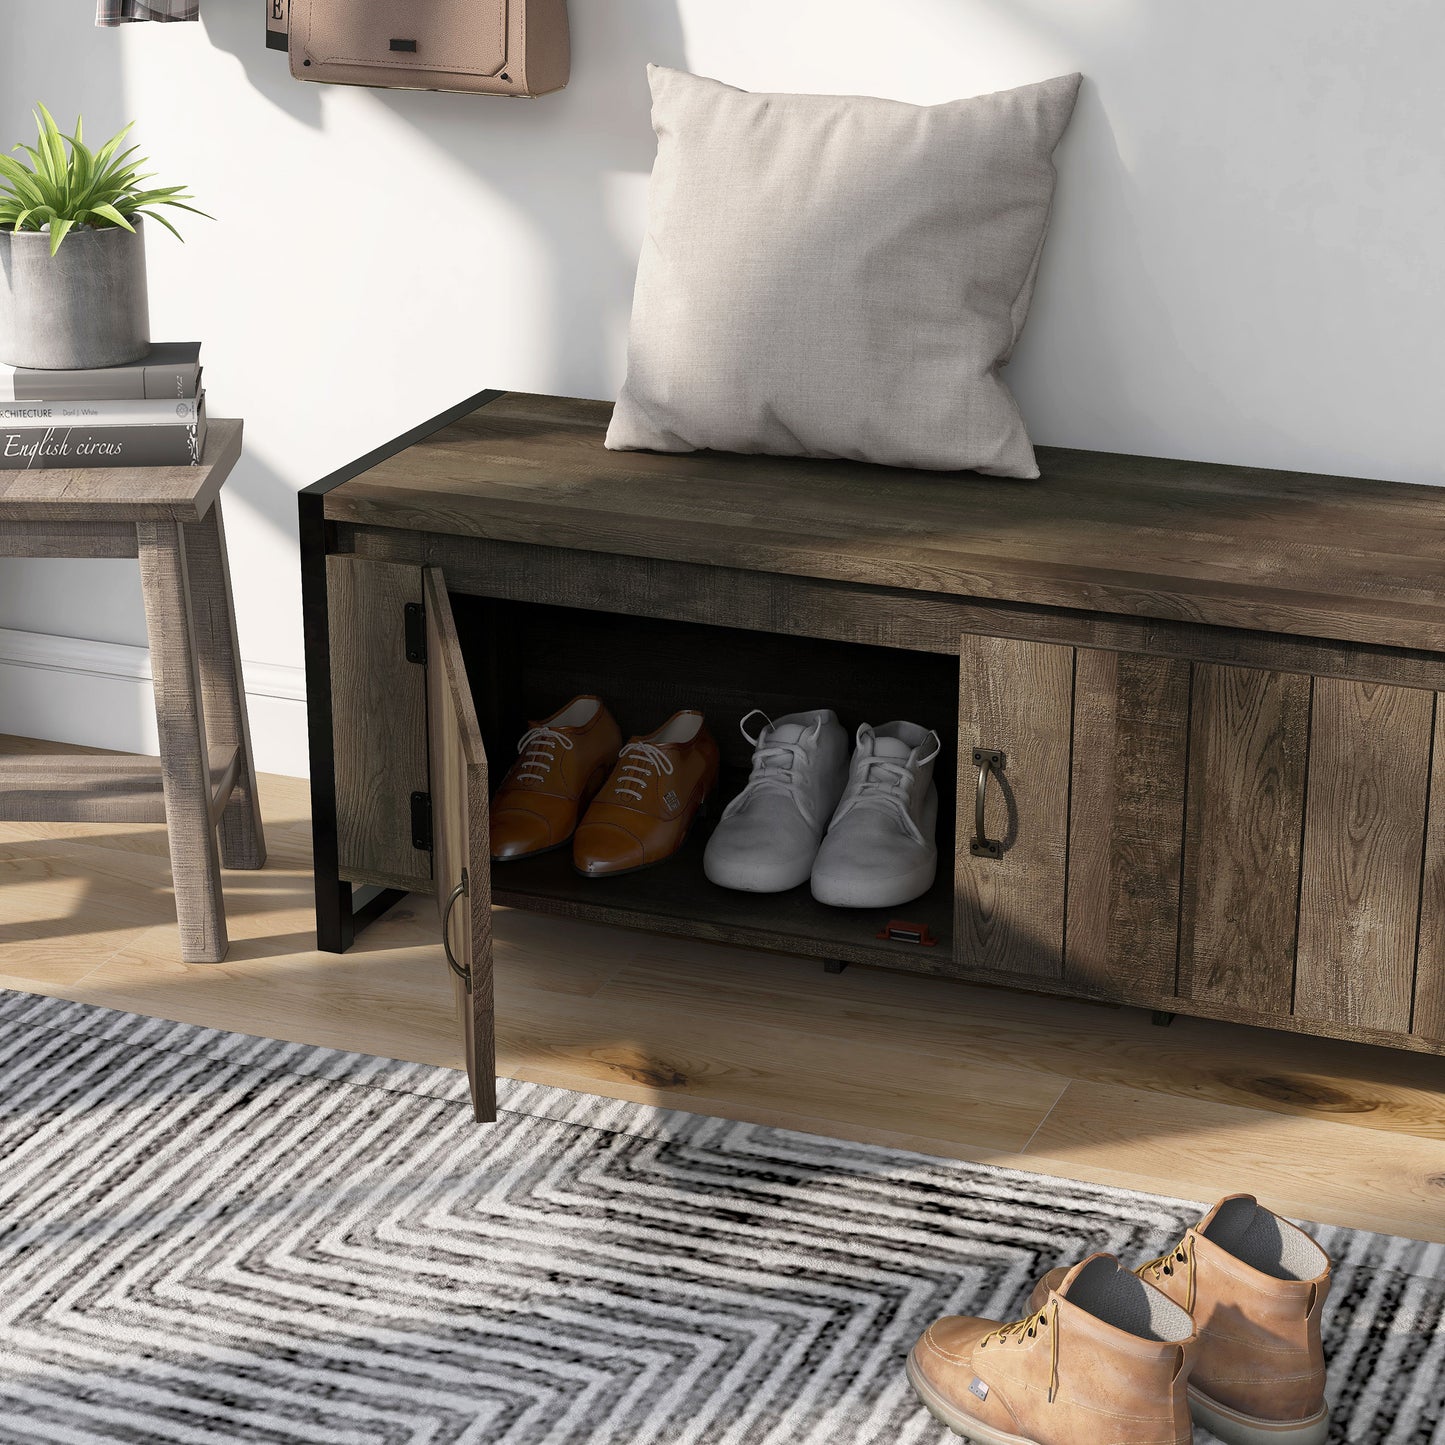 Left angled close up view of an industrial reclaimed oak two-door storage bench with one door open in an entryway with accessories